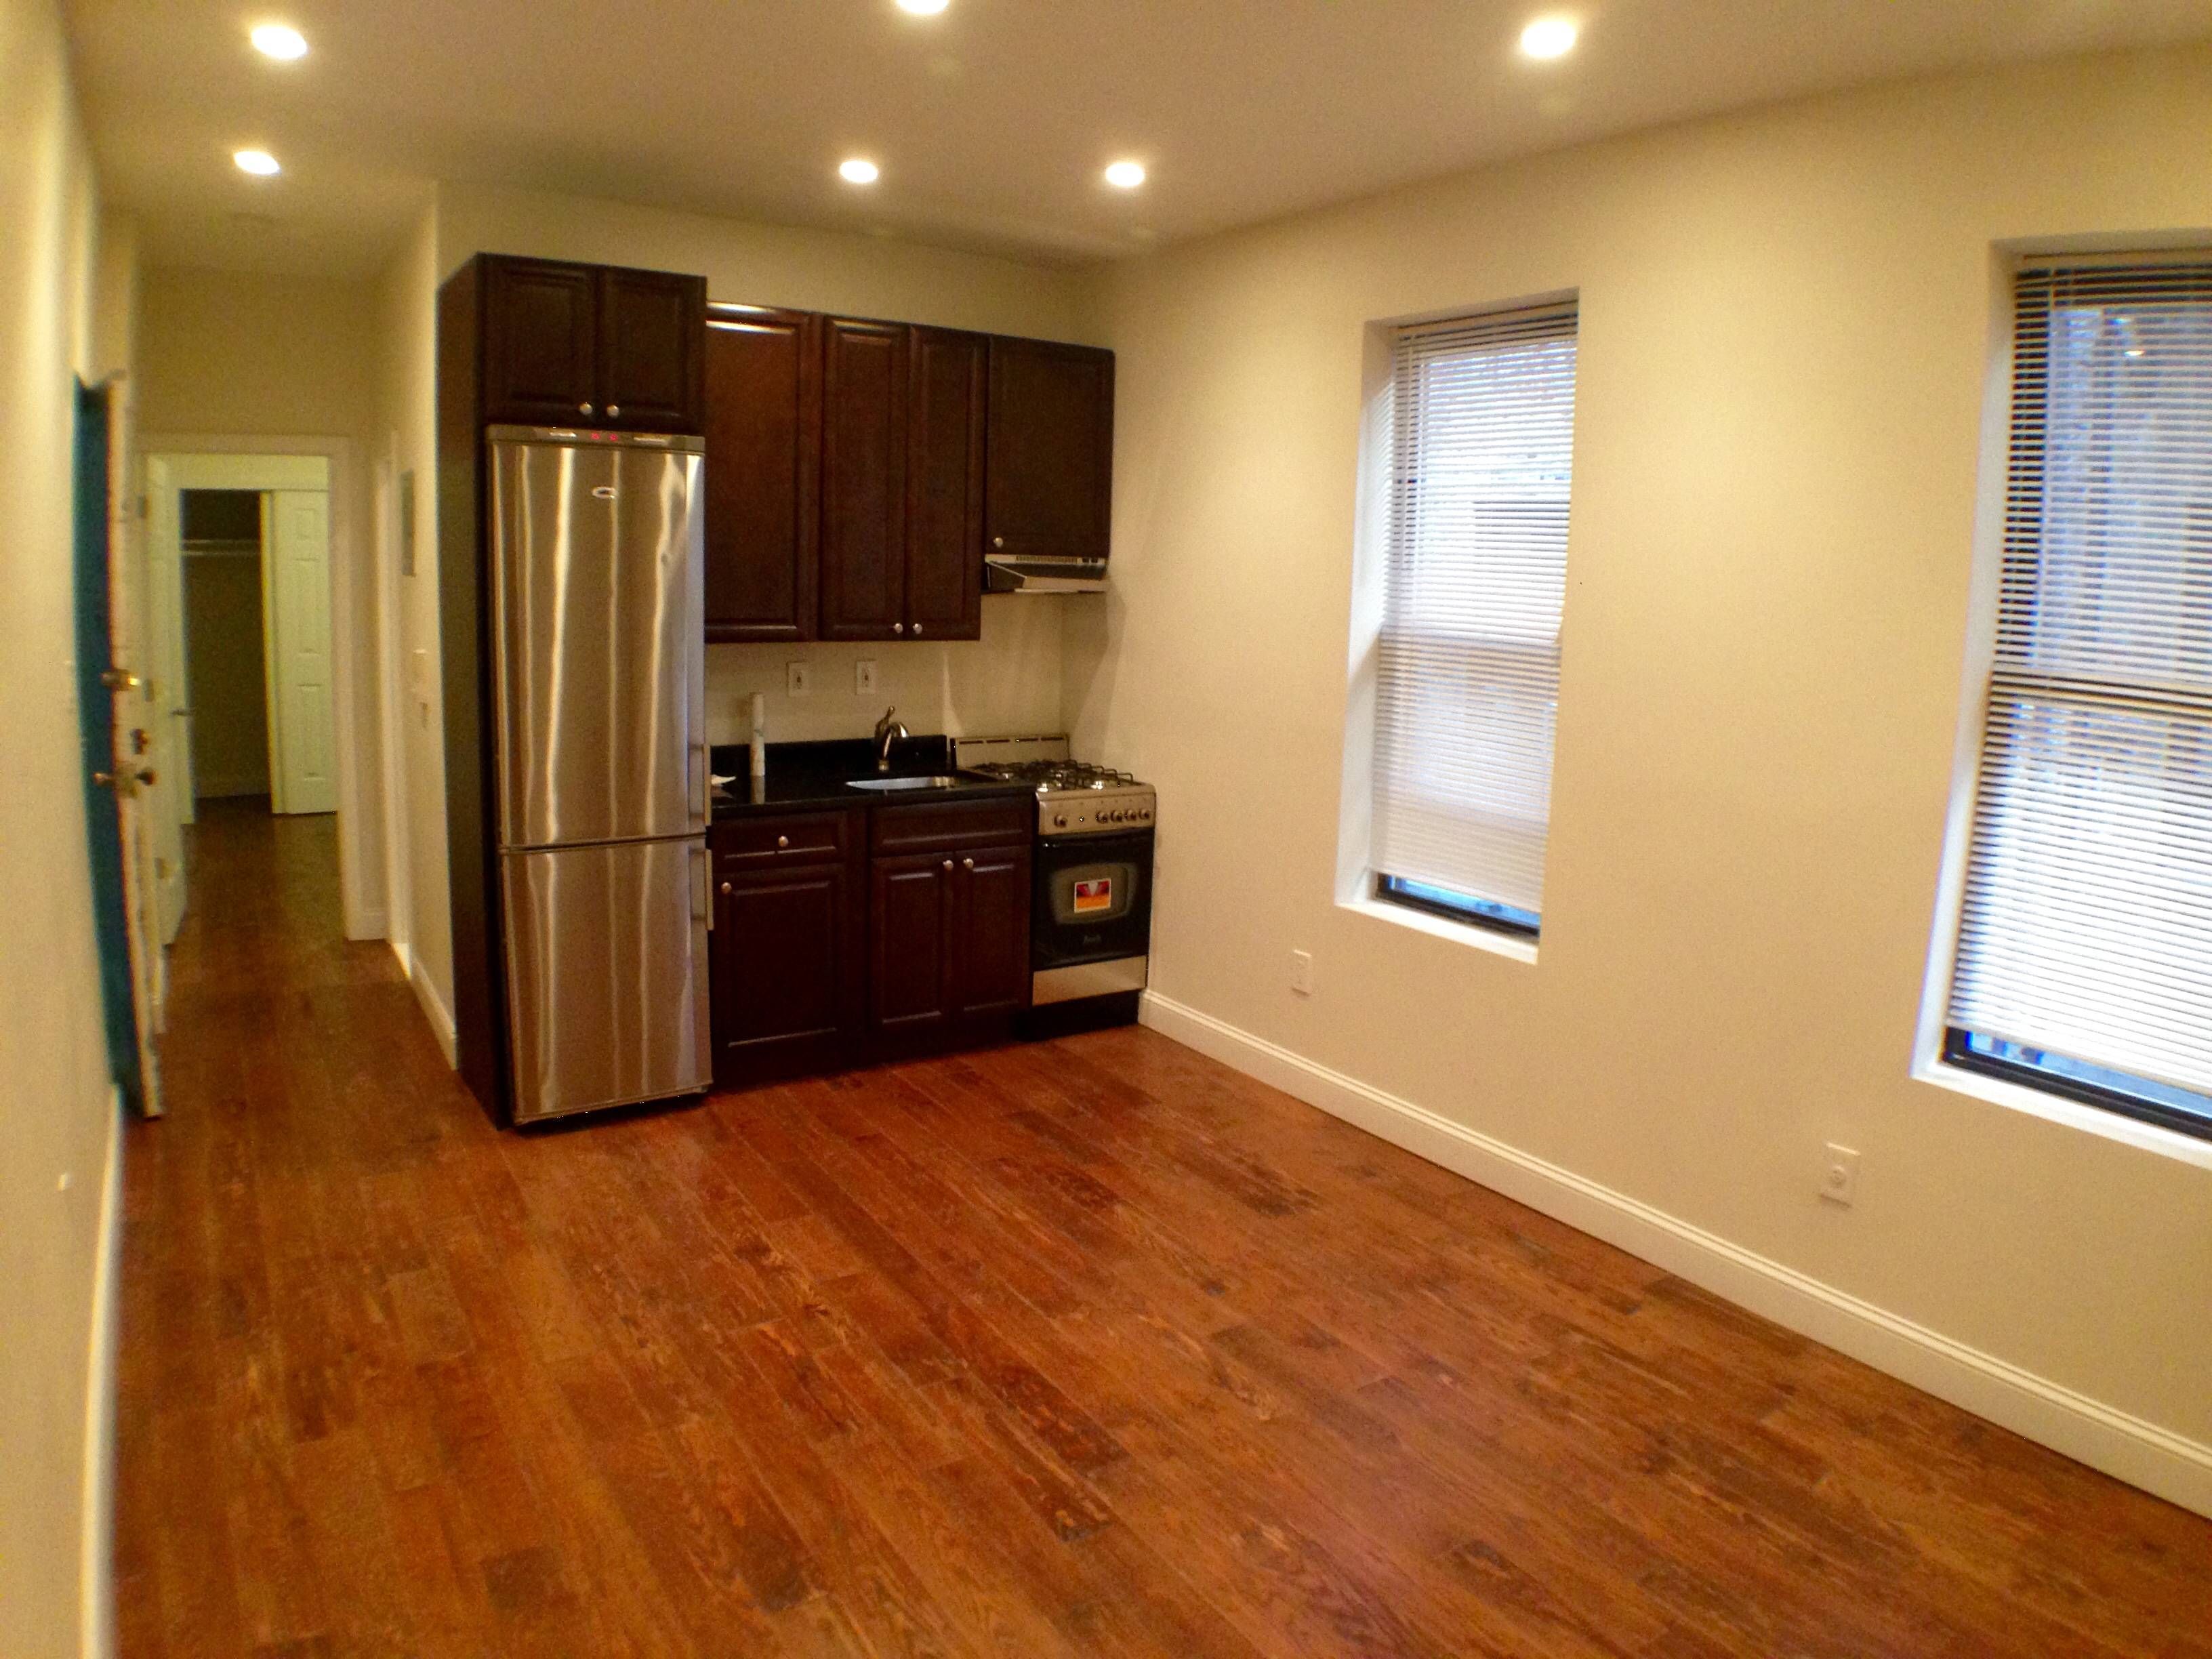 Astoria Newly Renovated Luxury 1 bedroom $1850.00 Broadway N/Q vicinity - Location Location Location  